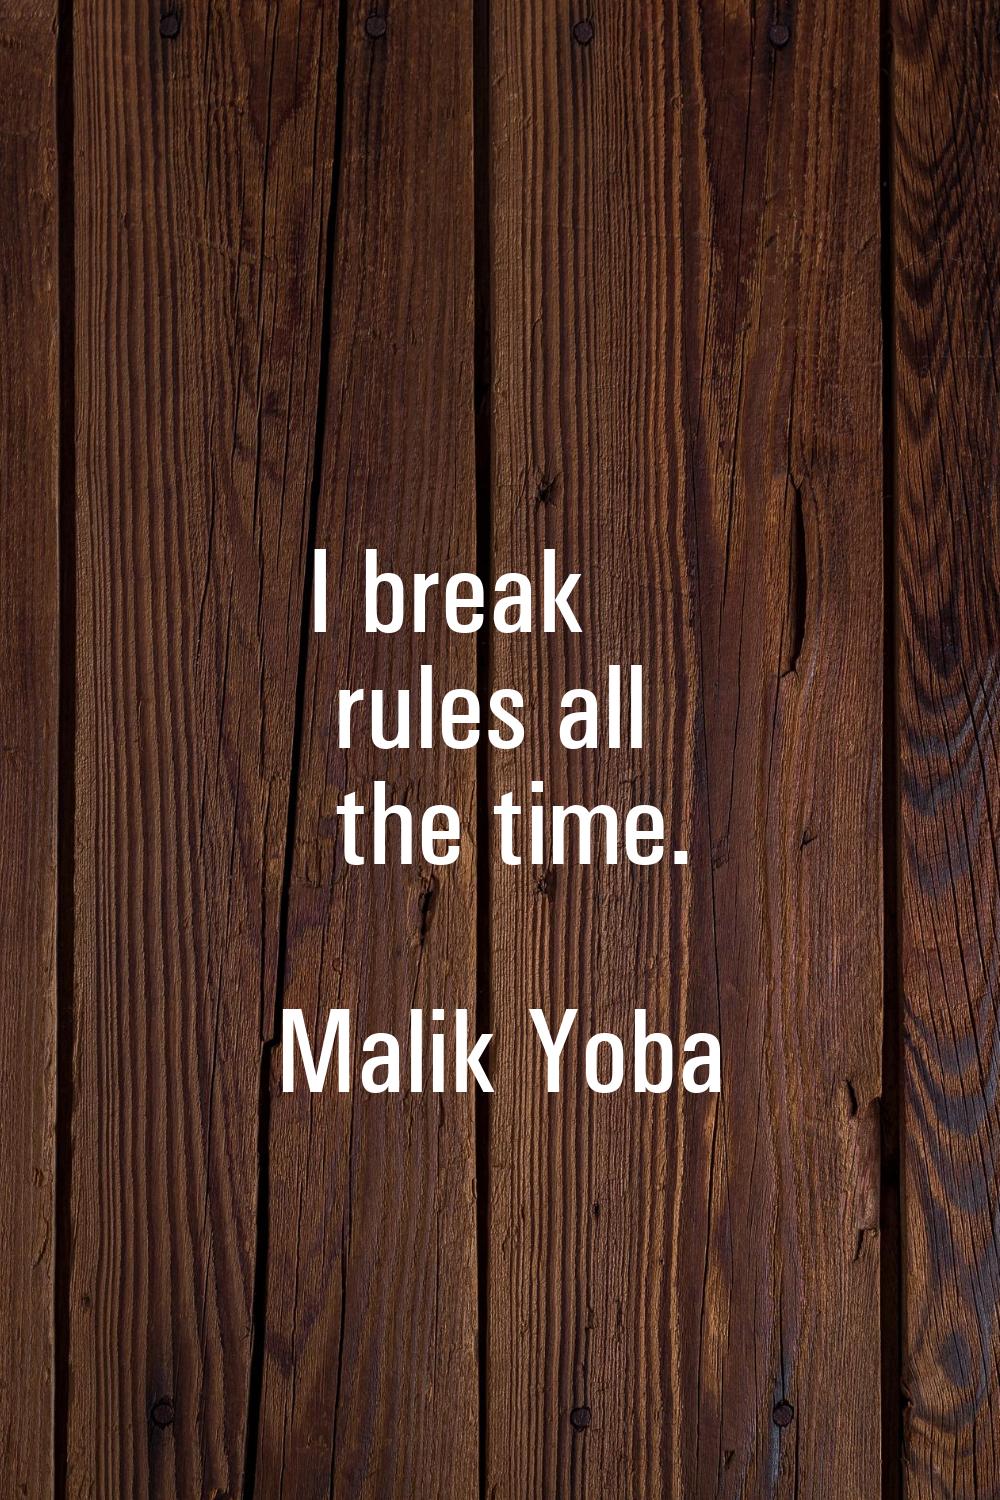 I break rules all the time.